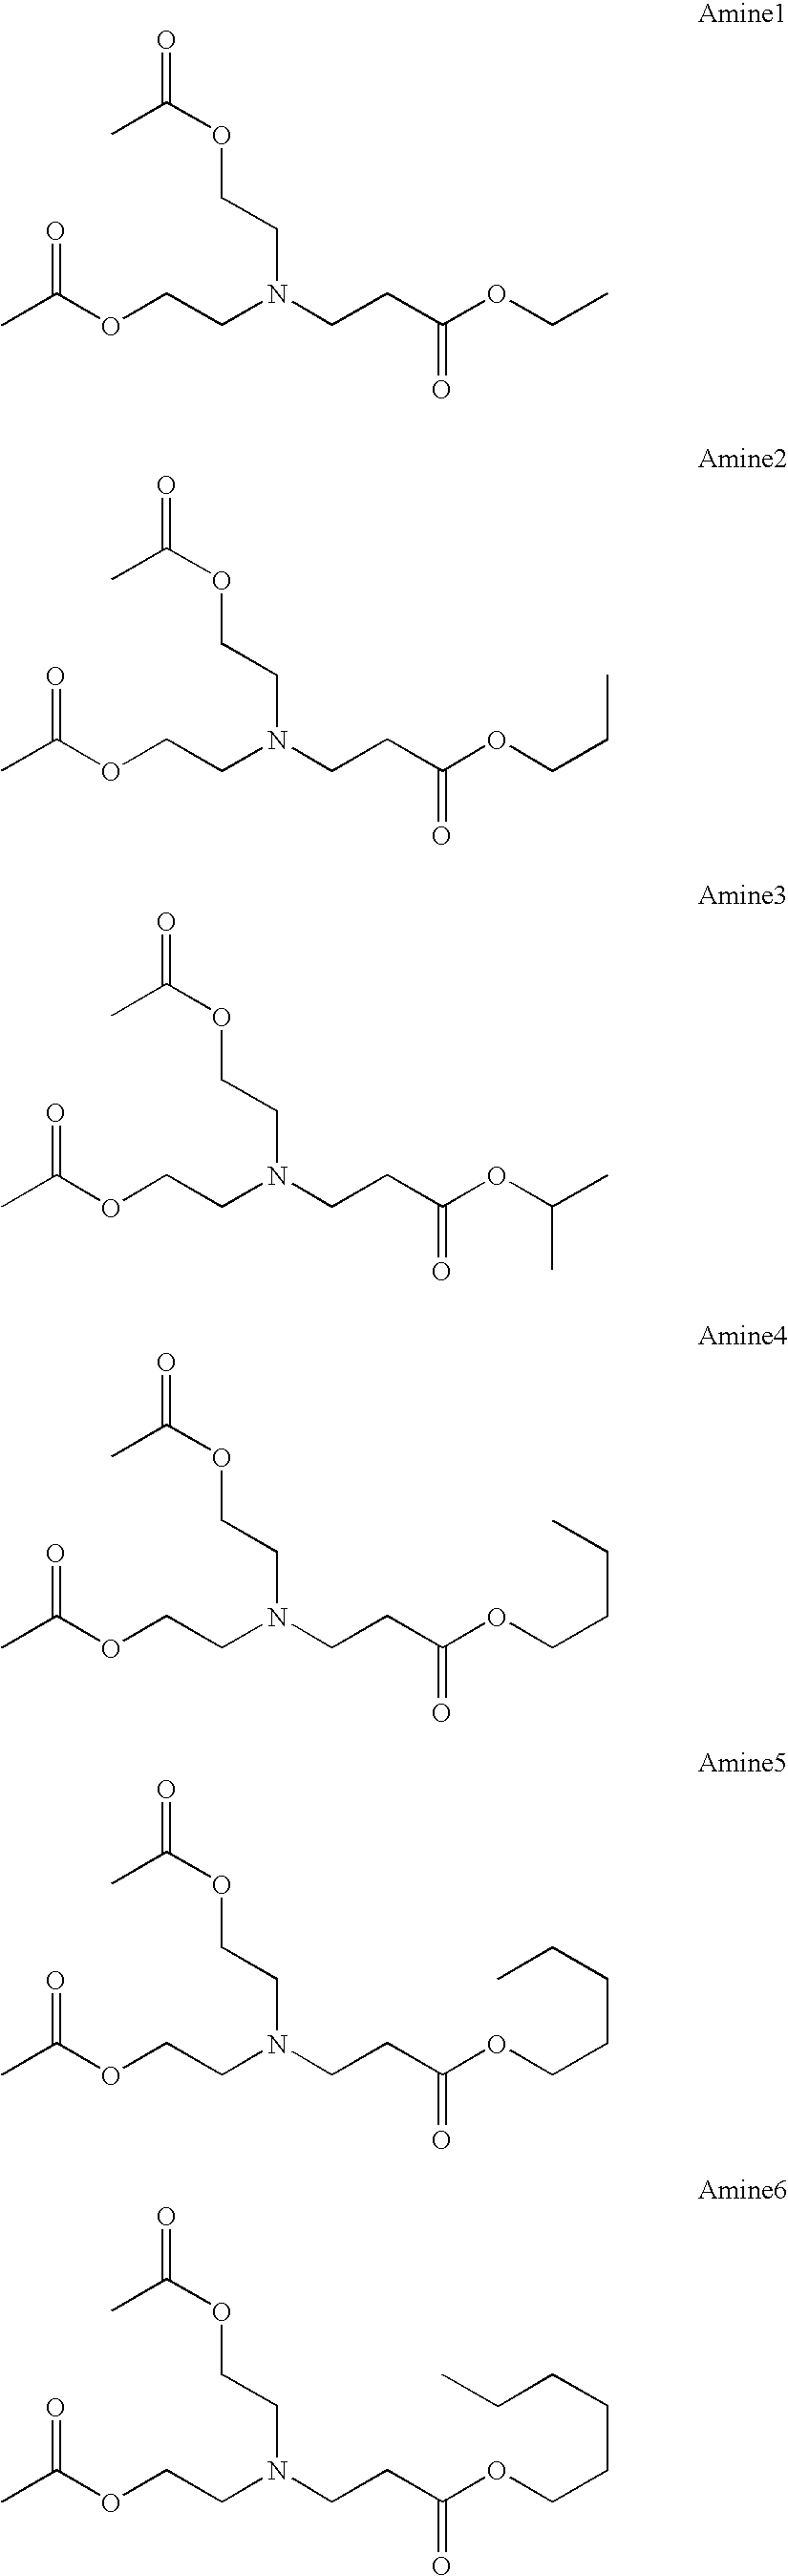 Tertiary amine compounds having an ester structure and processes for preparing the same